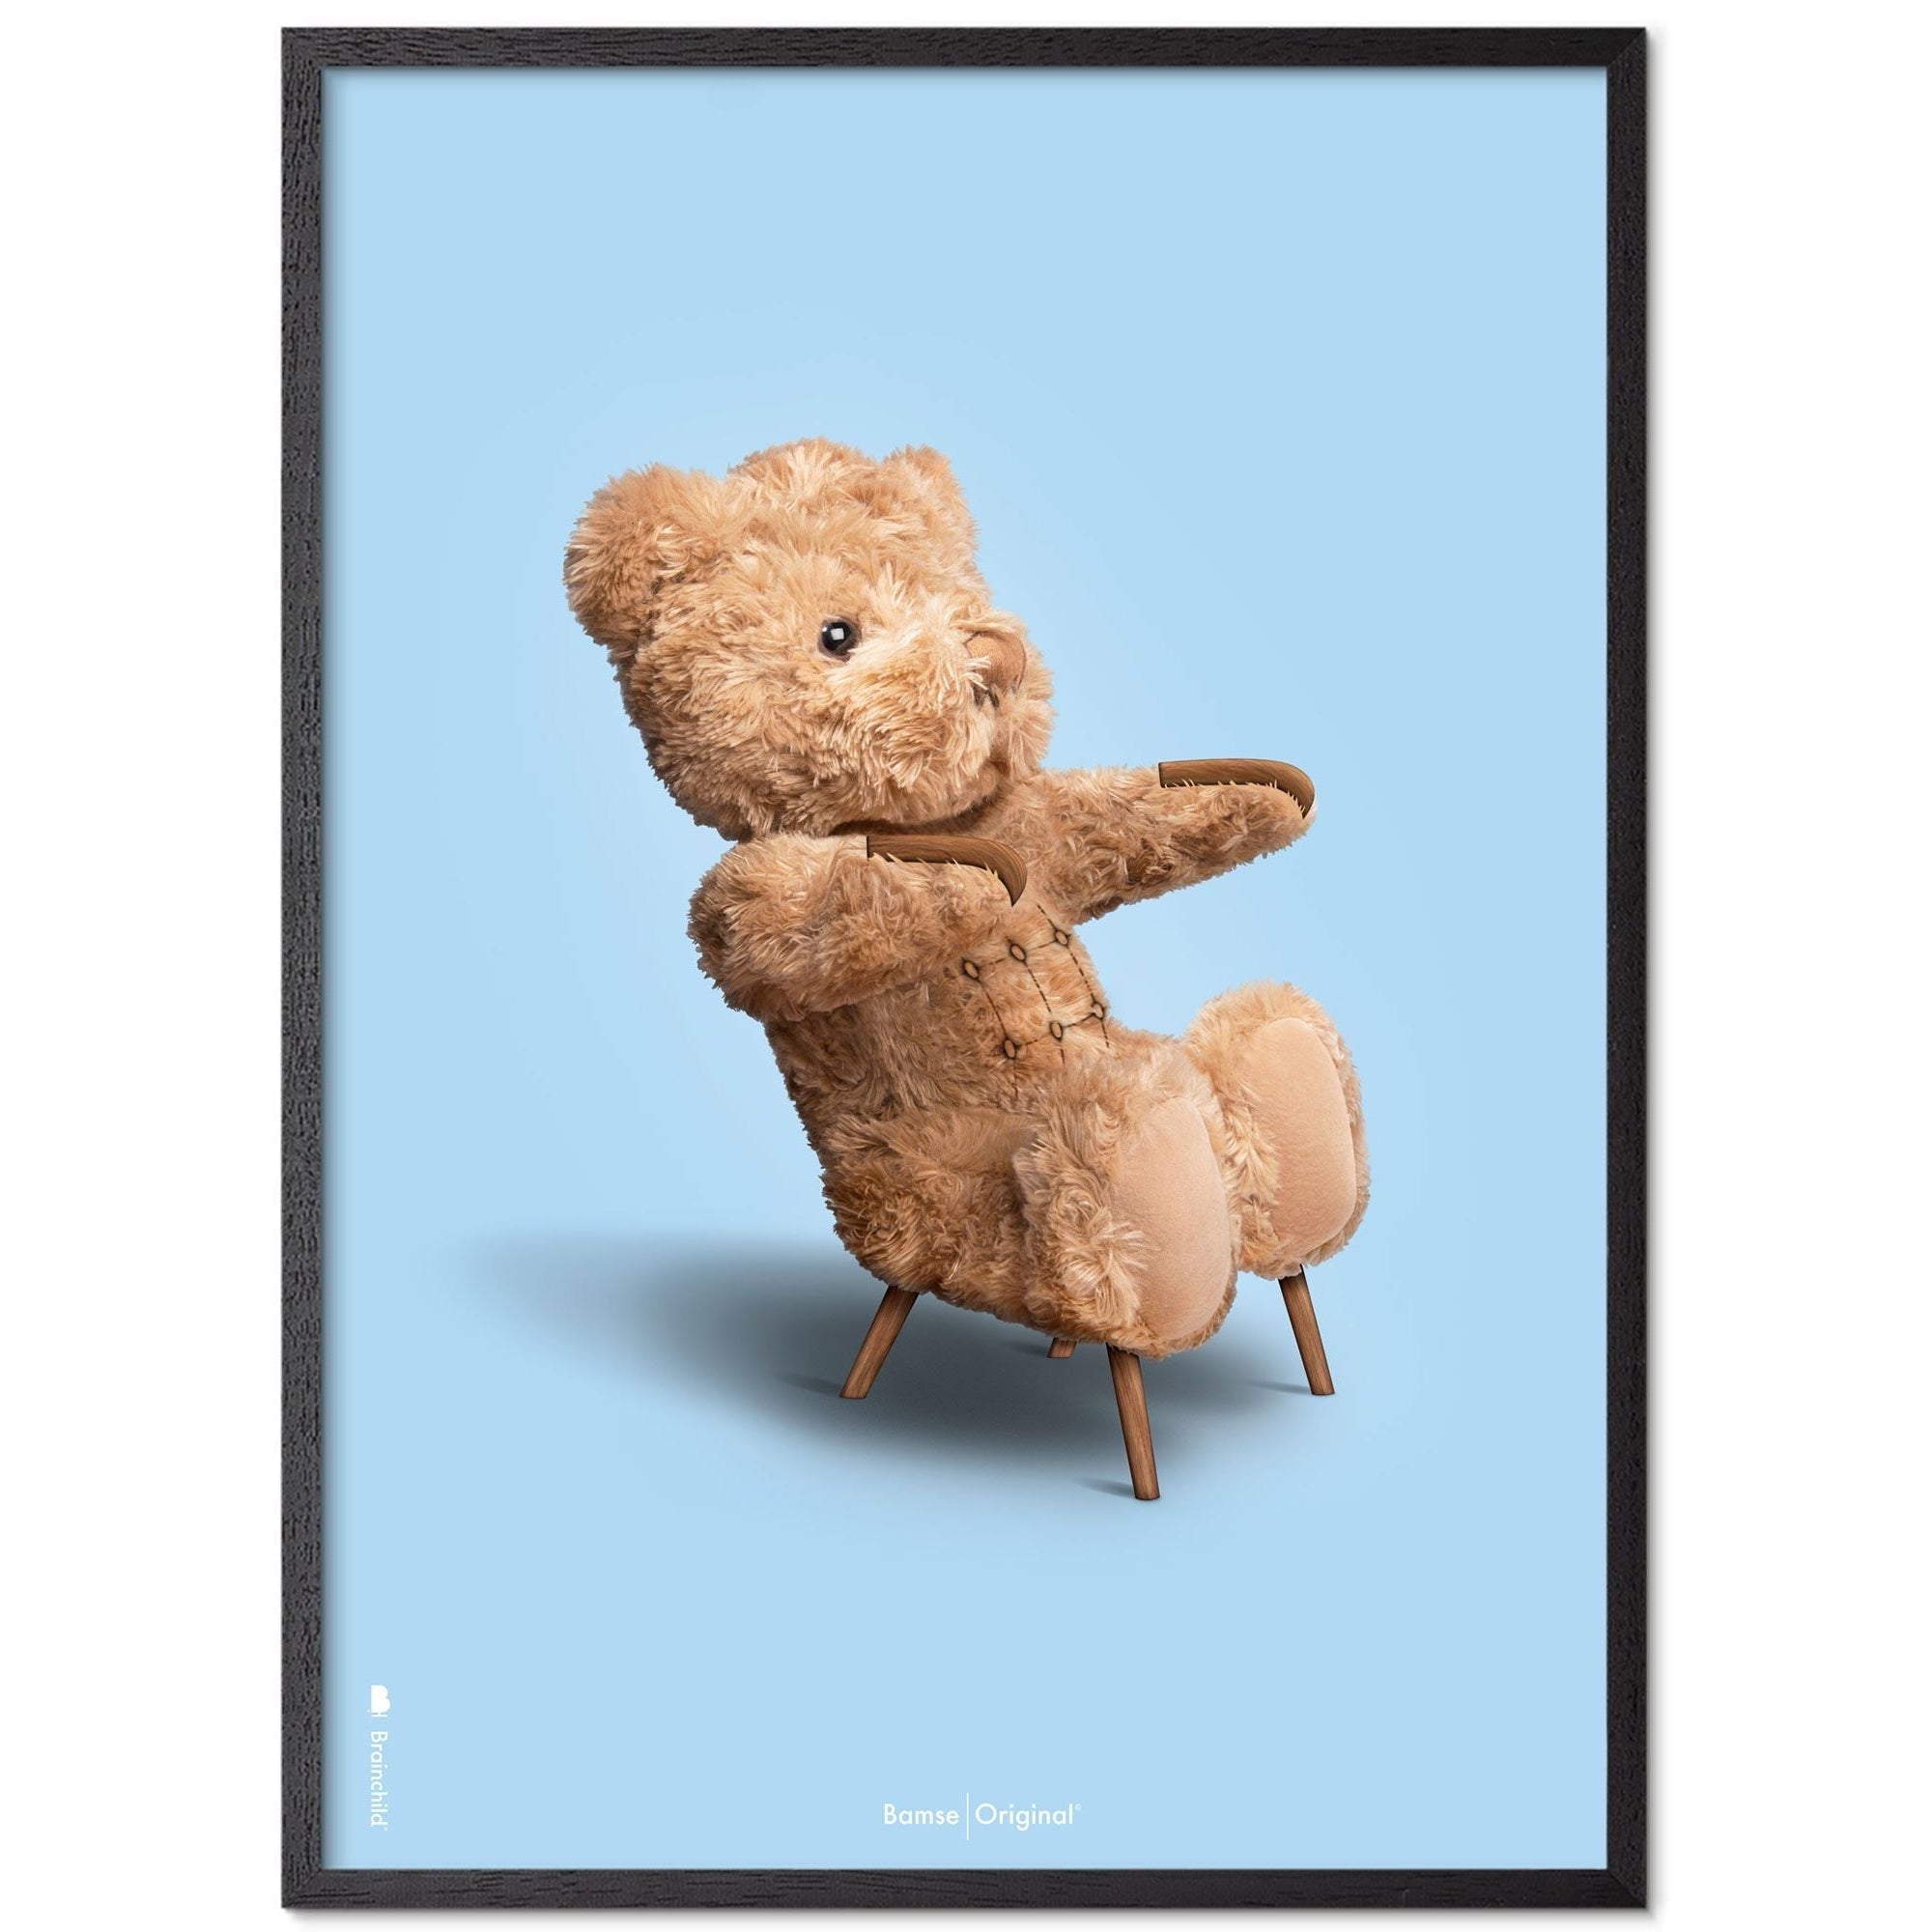 Brainchild Teddy Bear Classic Poster Frame In Black Lacquered Wood A5, Light Blue Background